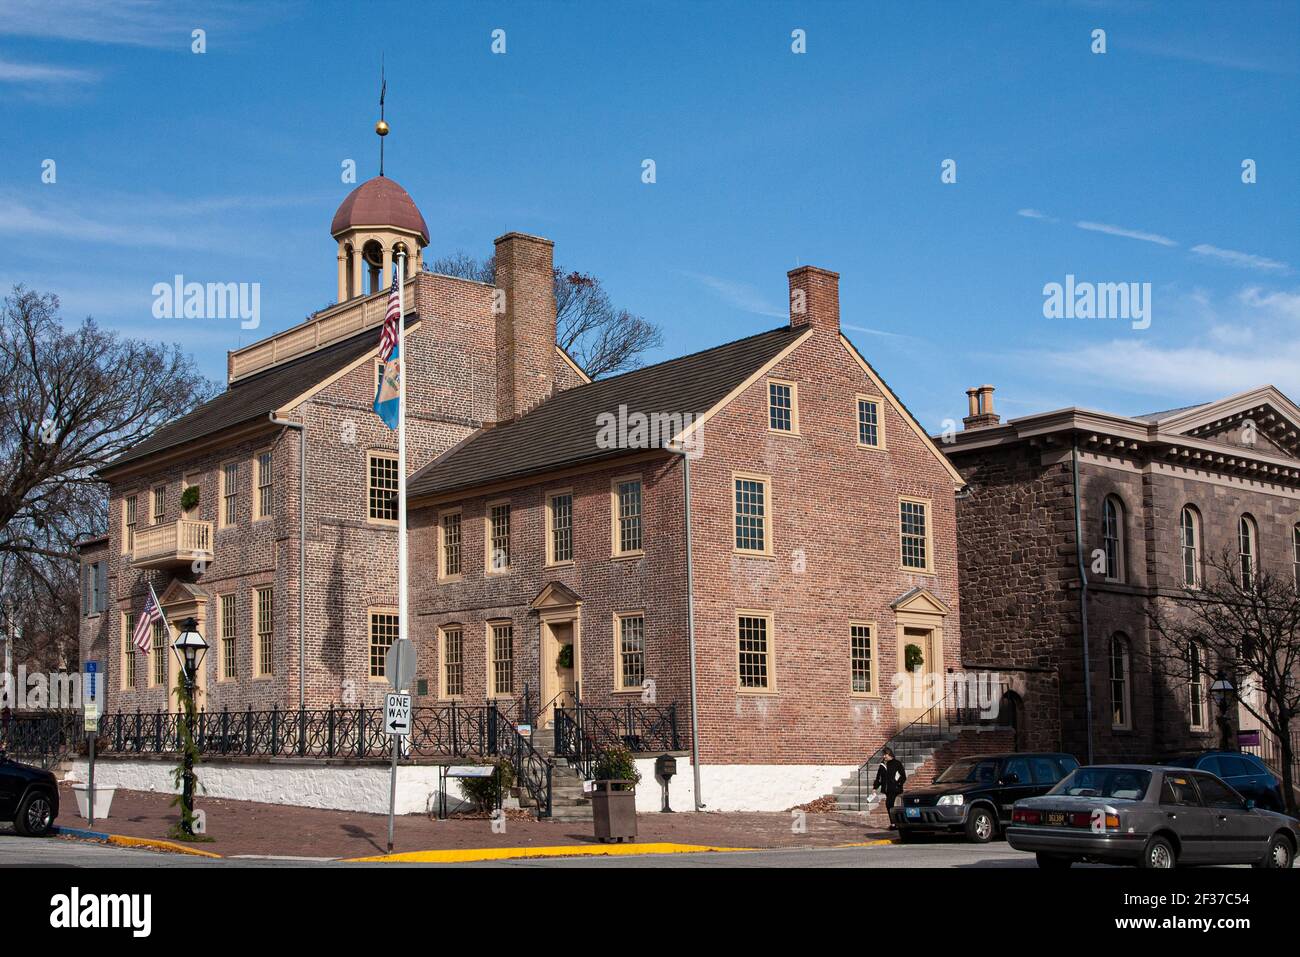 Delaware, New Castle, First State National Park, Fort Casimir, First Capitol, Statehouse, Court House, Und Montagehalle, Stockfoto